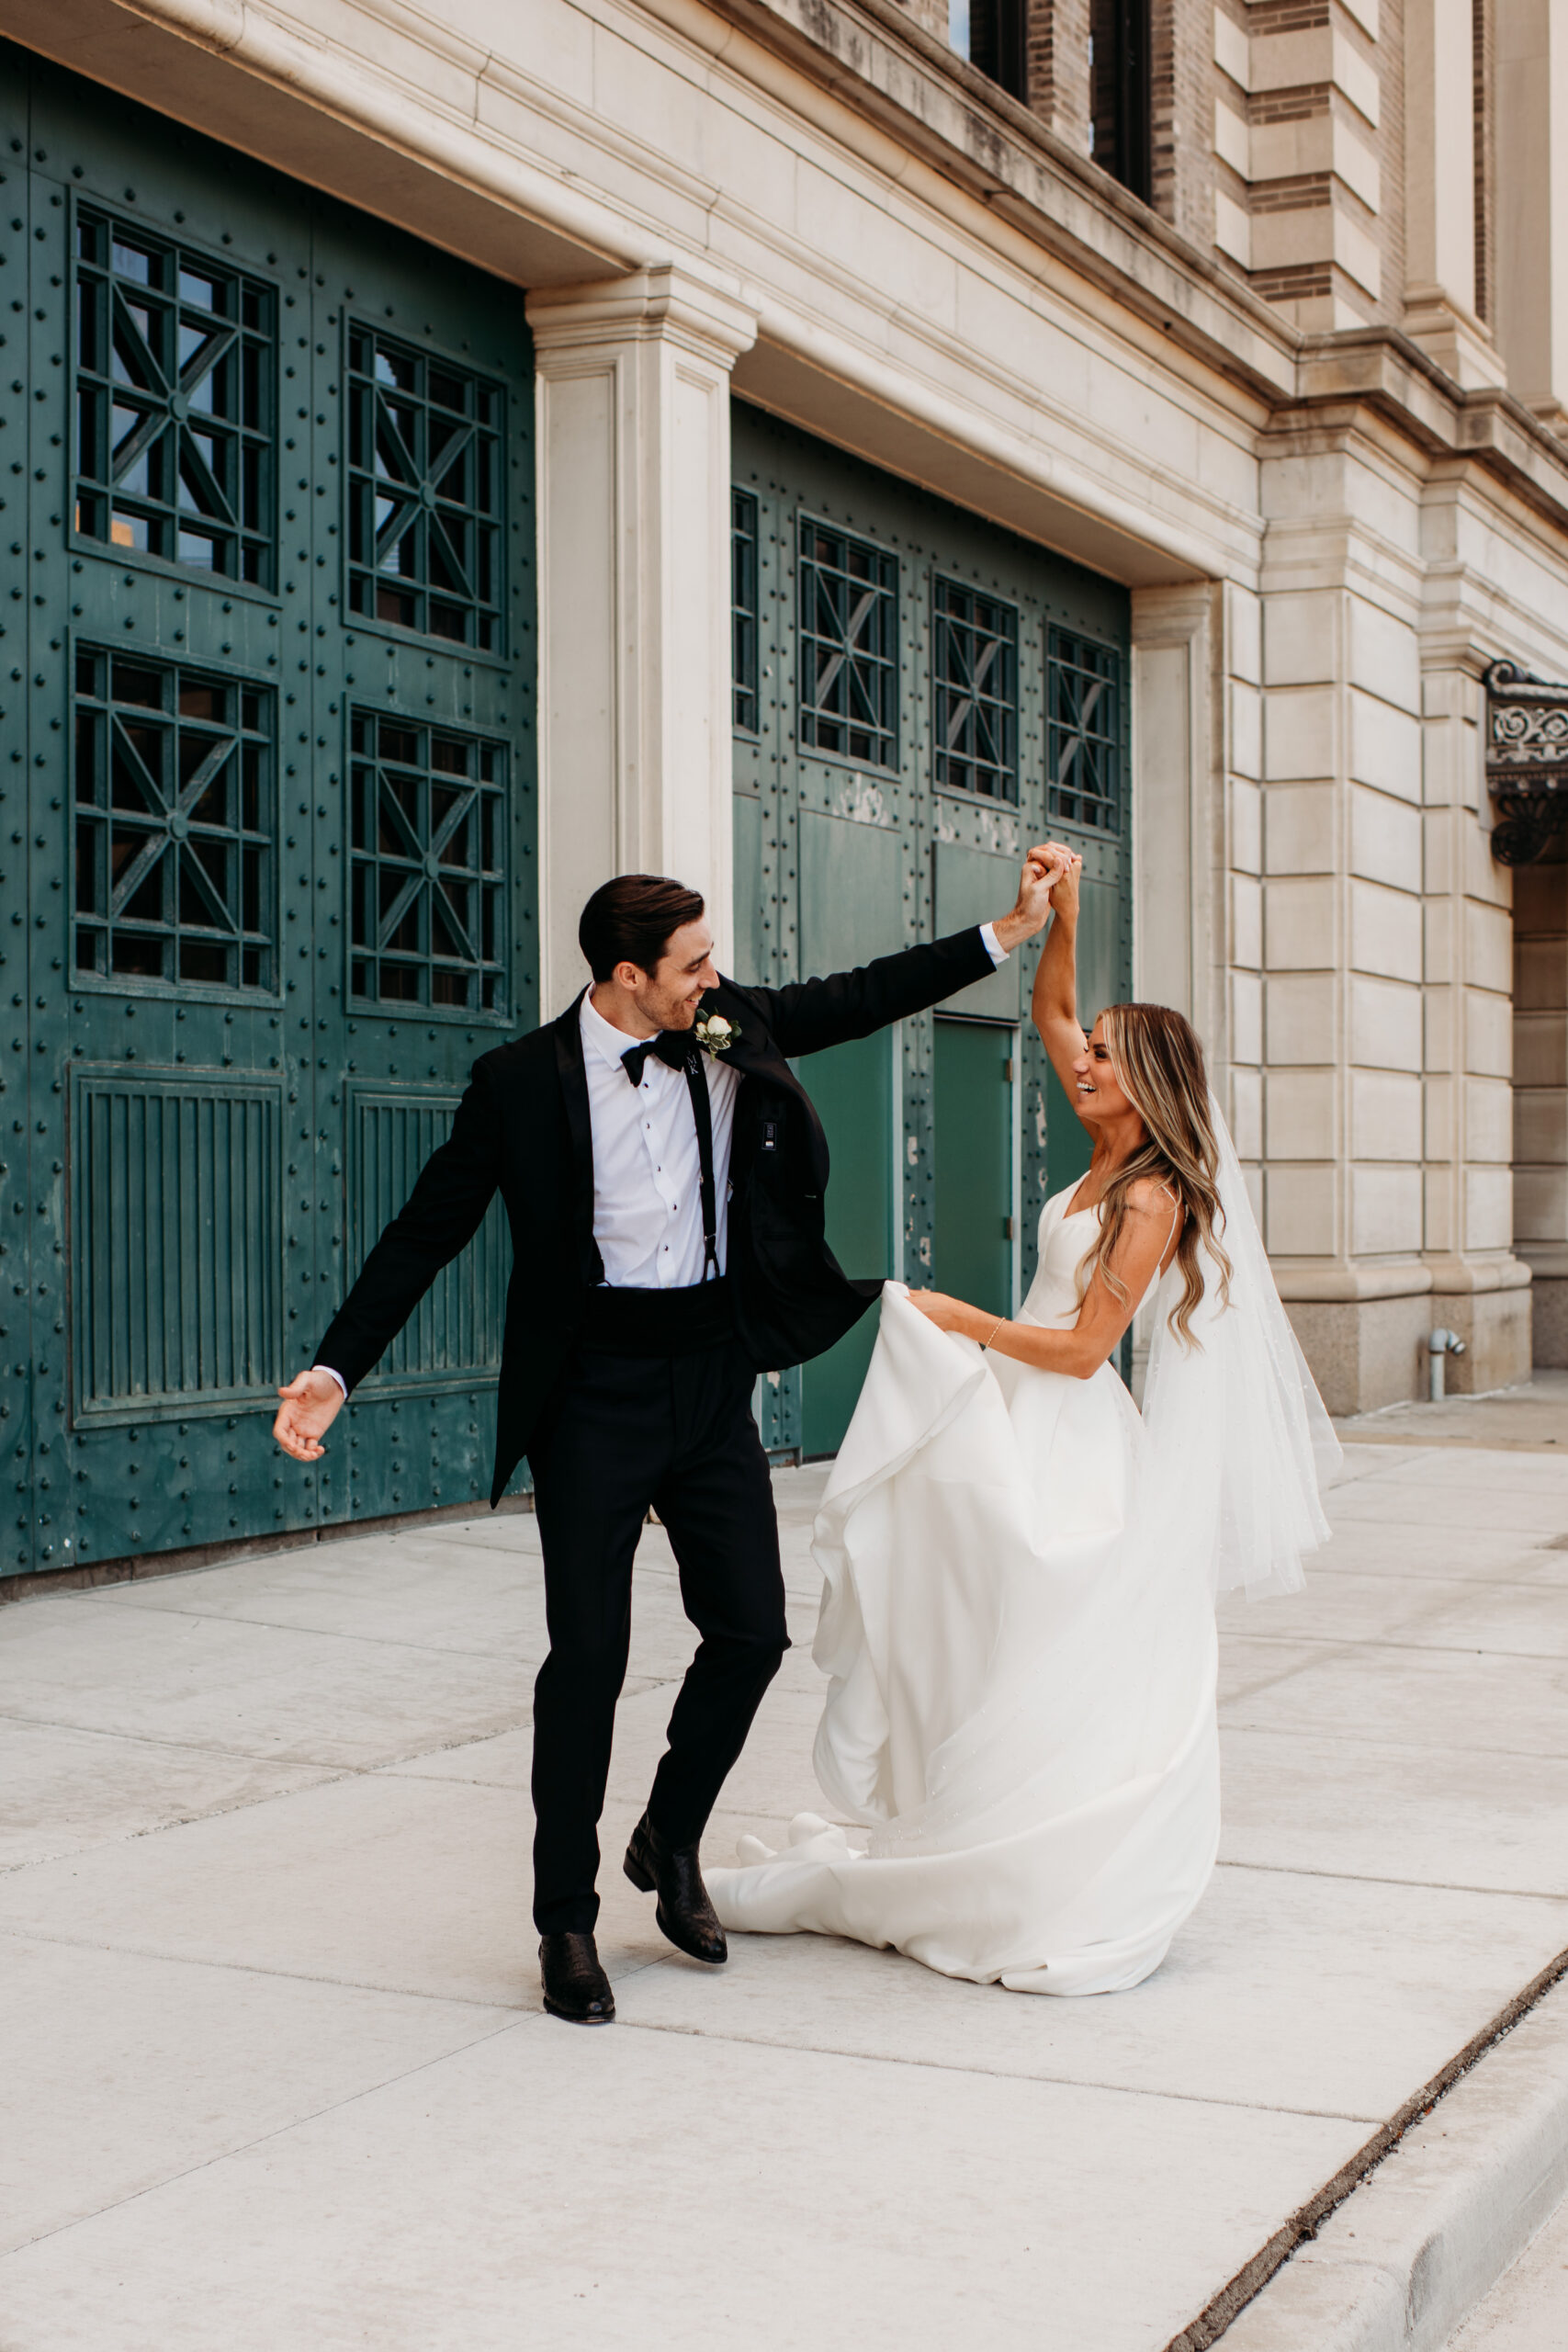 bride and groom in classic wedding attire dancing outside on the street in front of a blue wall near